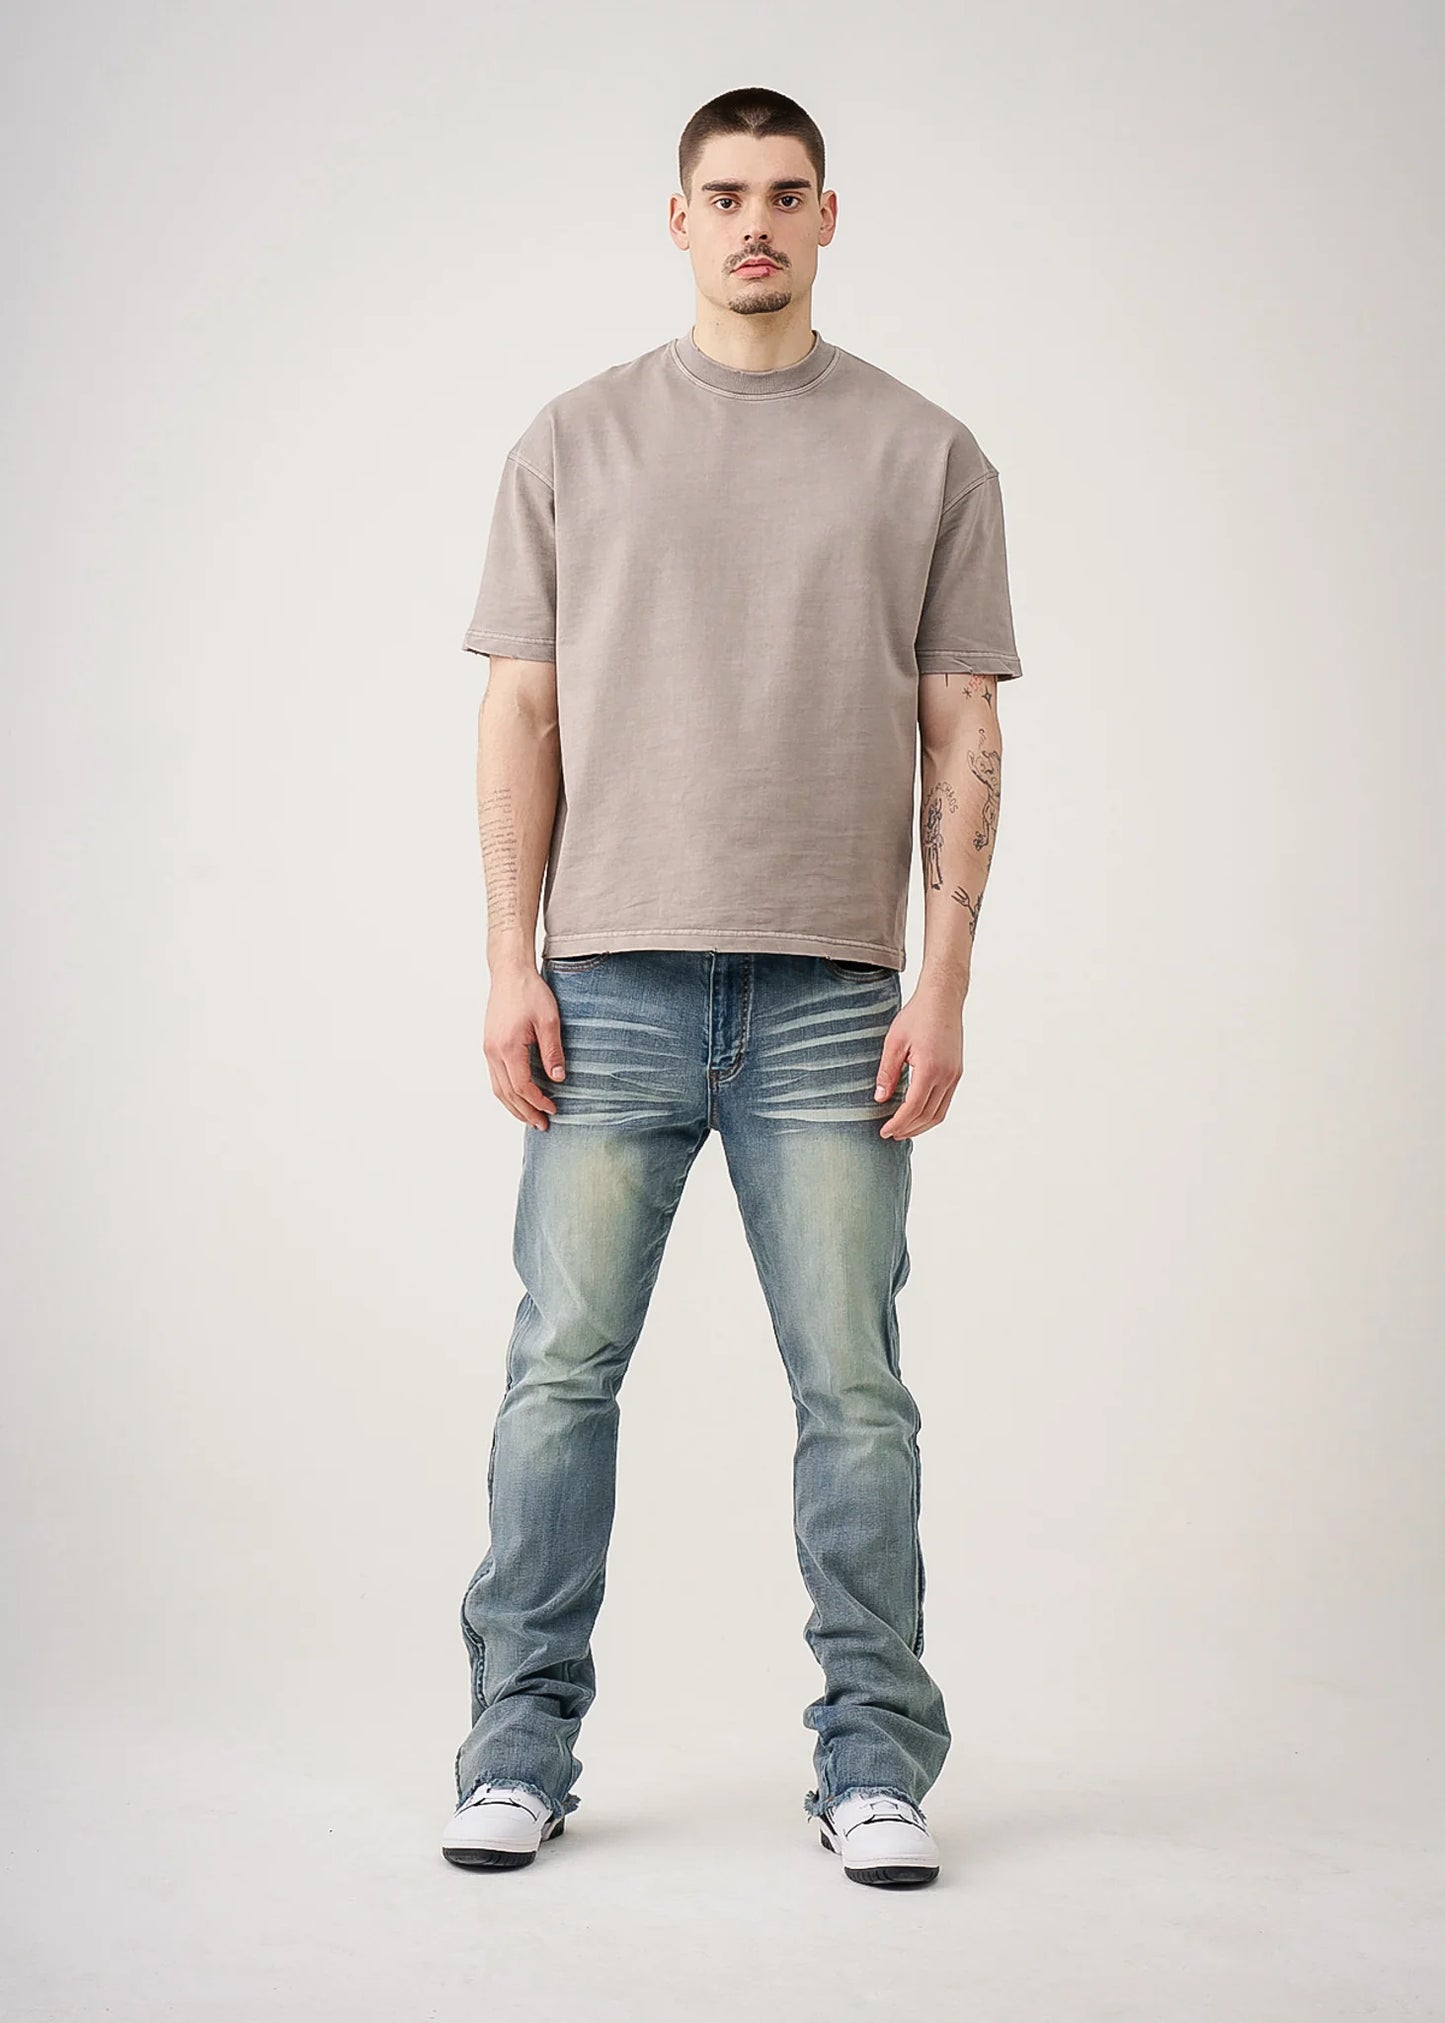 Gray 10 oz Oversized Garment Dye French Terry Distressed T-Shirt